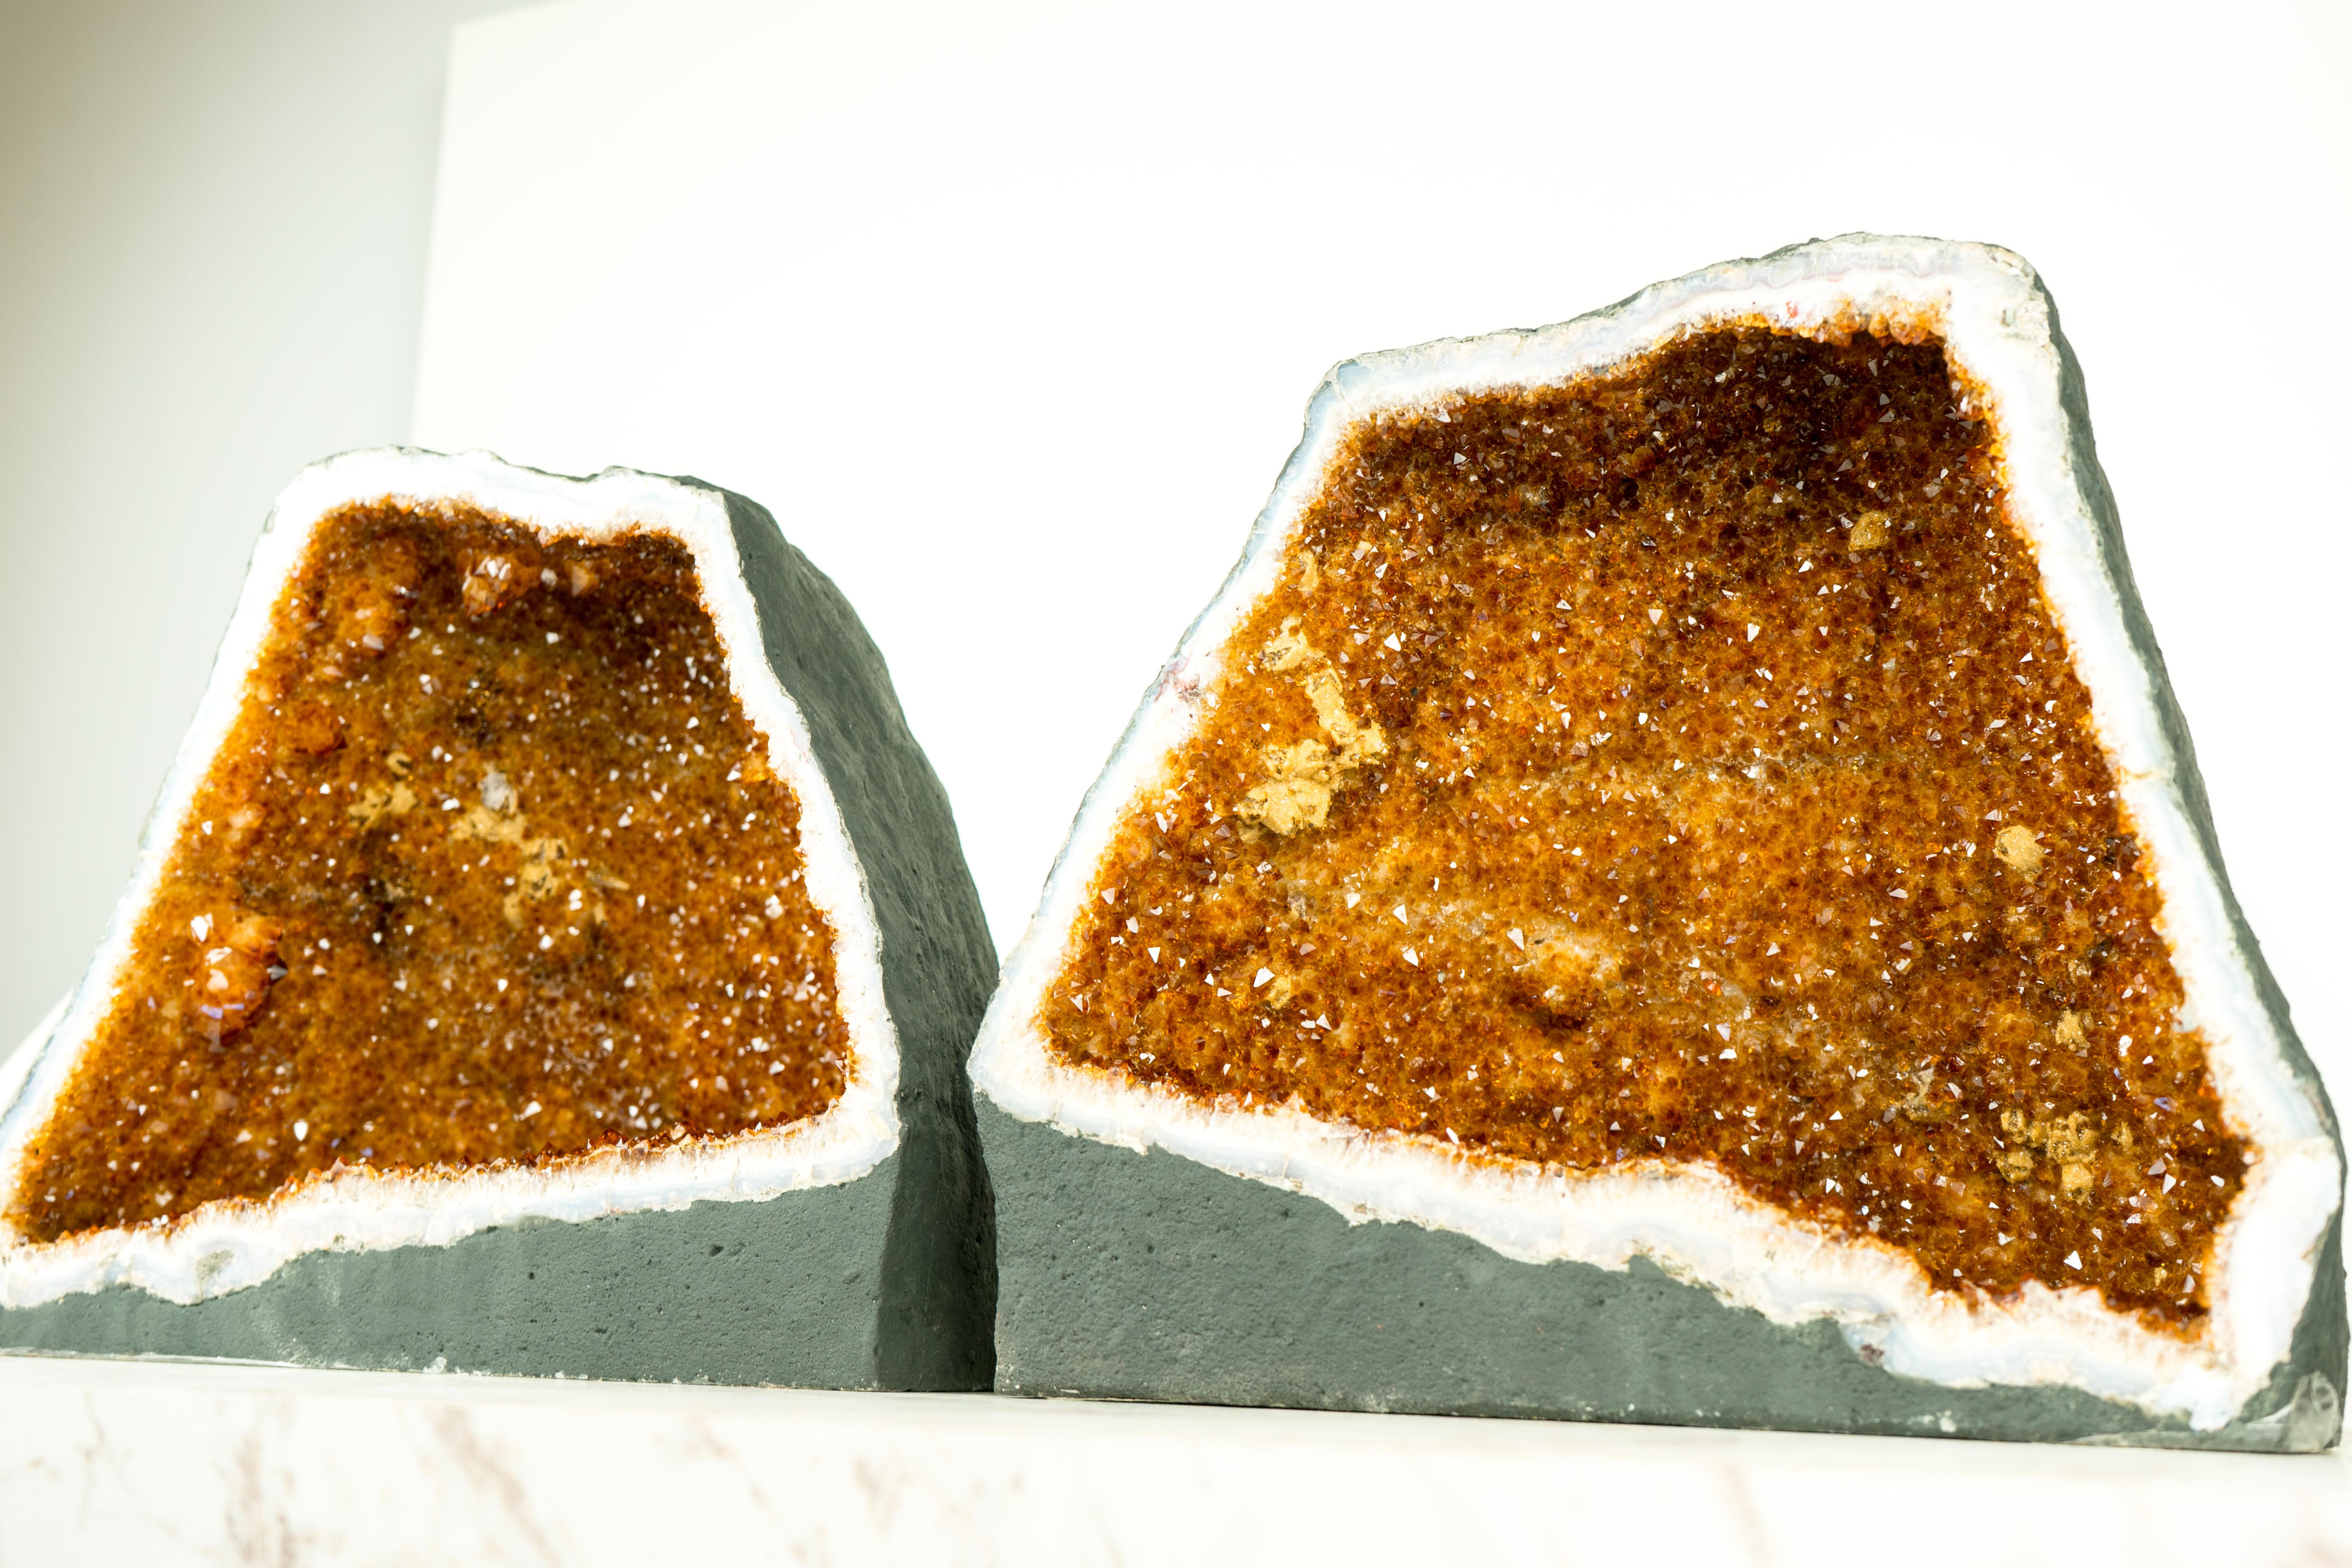 Pair of Bookmatching Citrine Geodes: A Stunning Display of Deep Orange, Sparkly Citrine Druzy

▫️ Description

This extraordinary pair of natural Citrine geodes features shiny, rich, saturated orange Citrine Druzy and beautiful small stalactites.